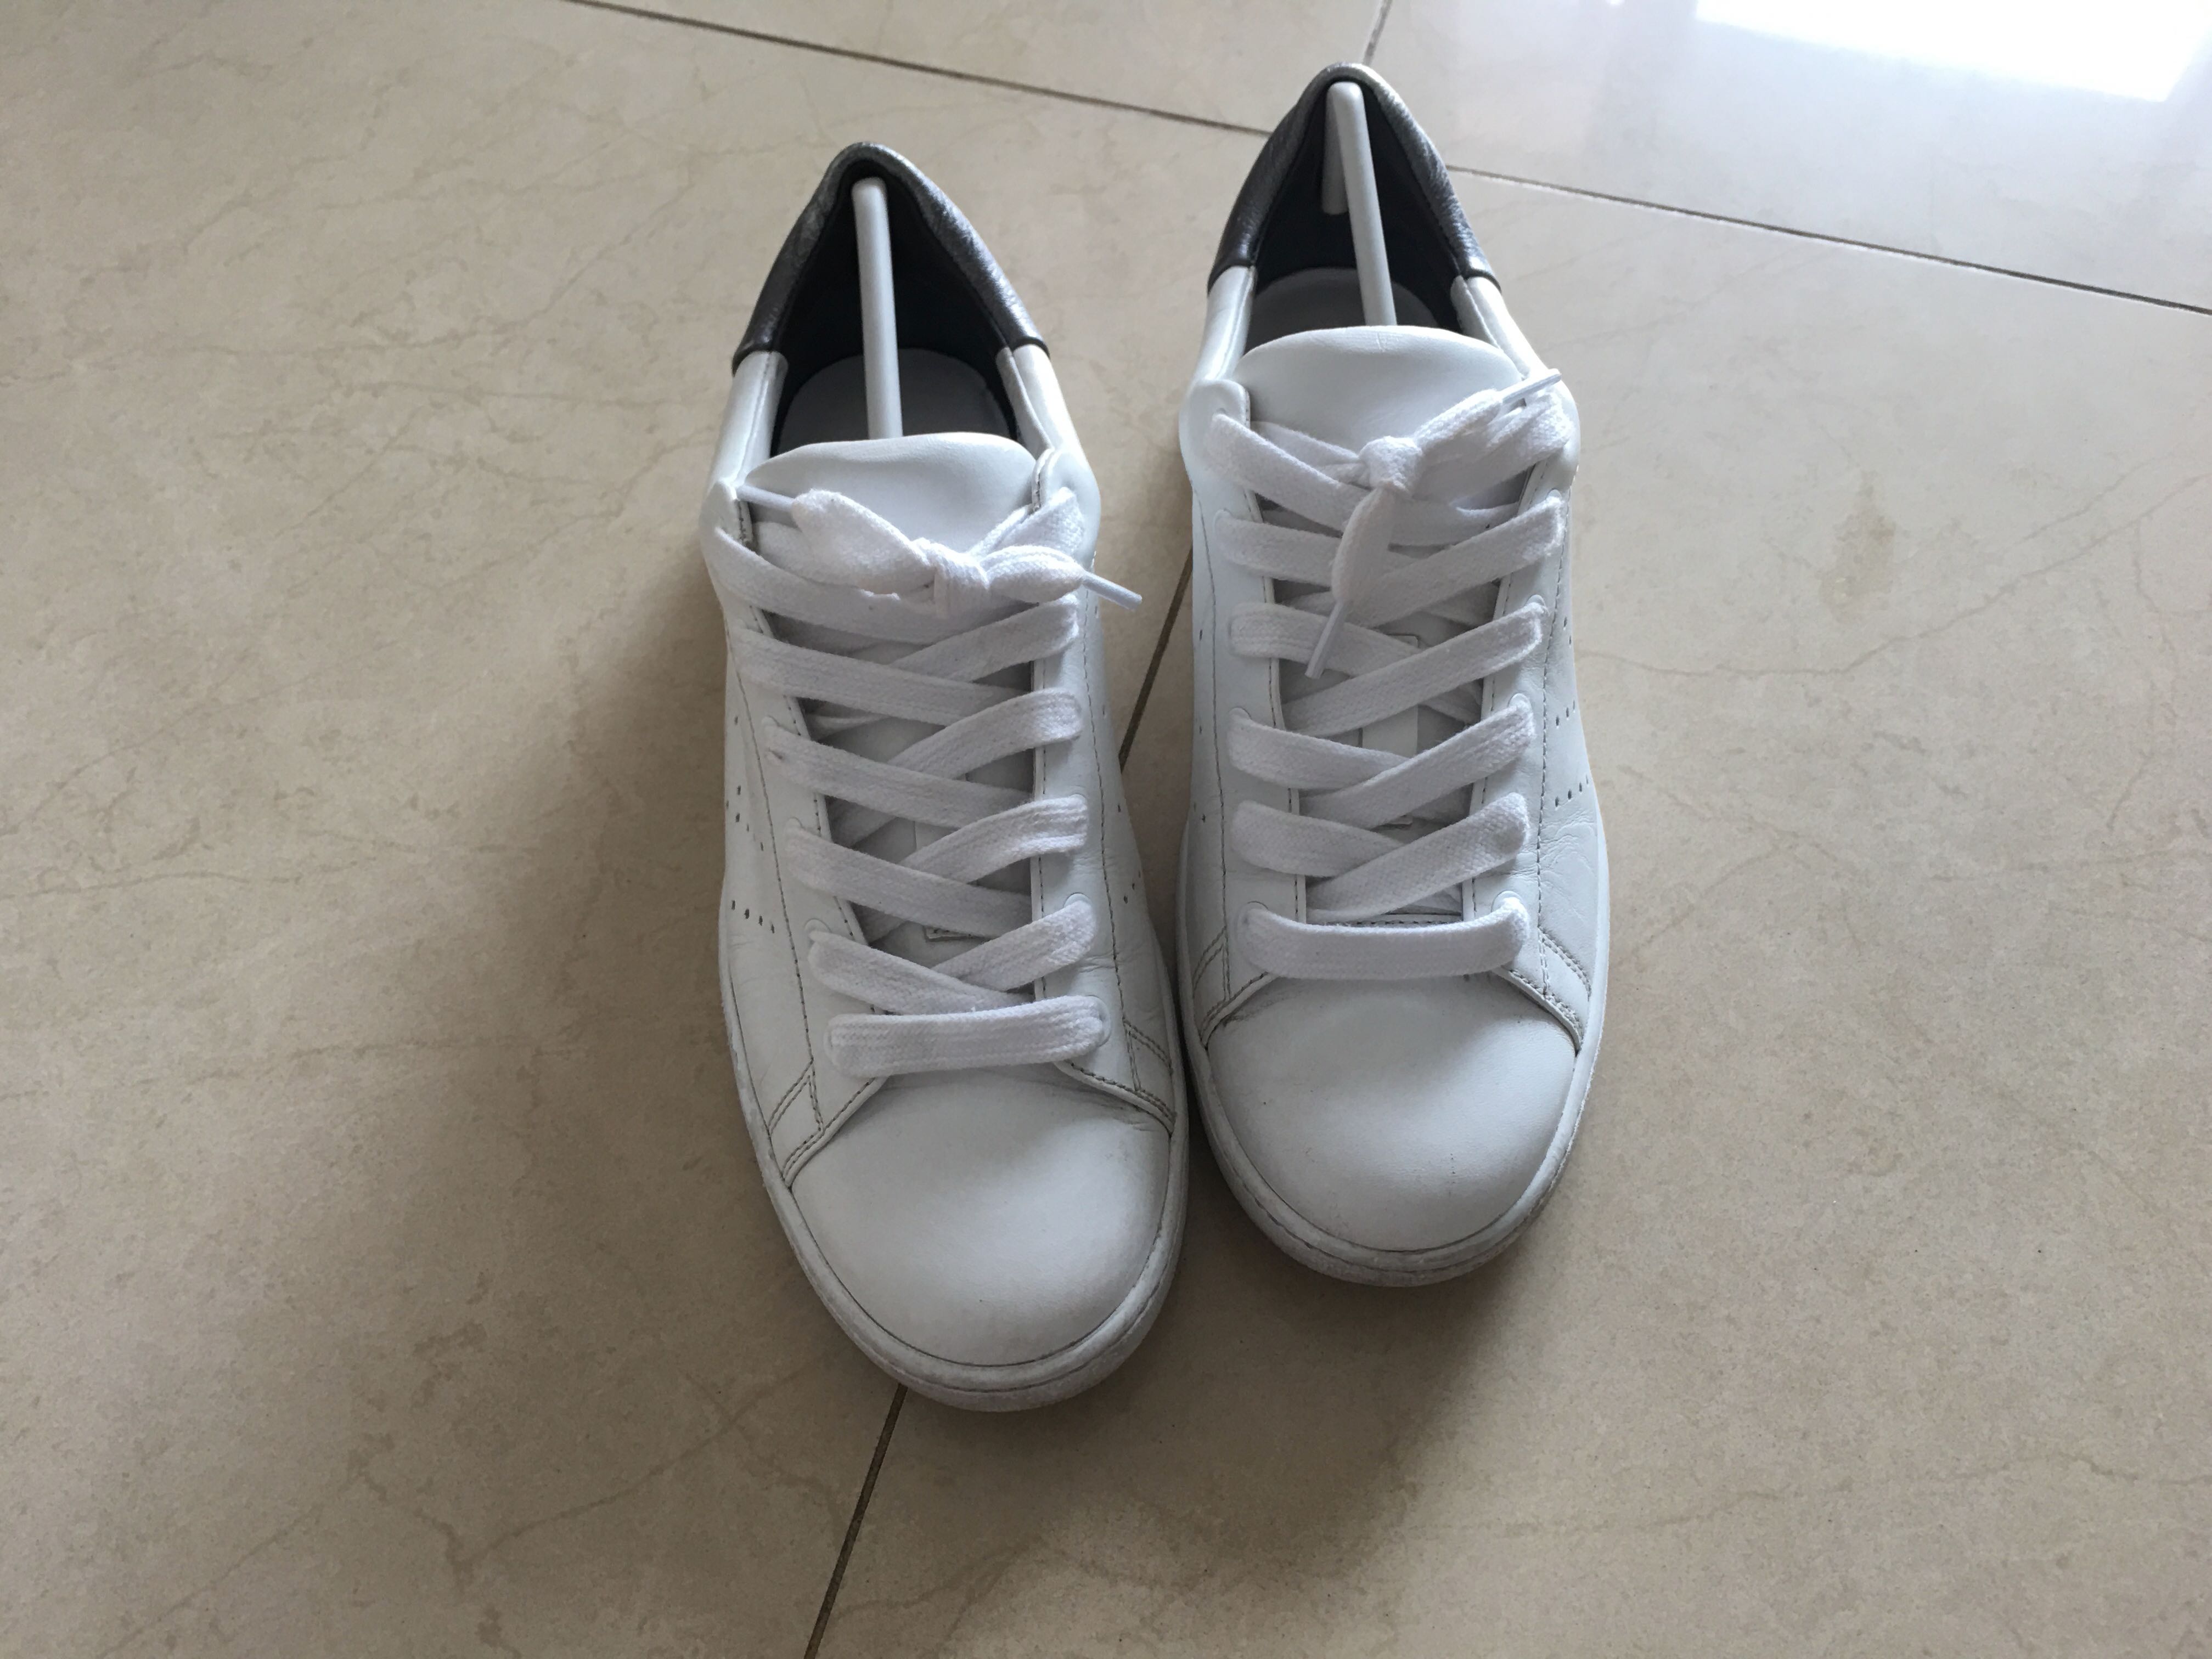 Vince white sport shoes sneakers puma 